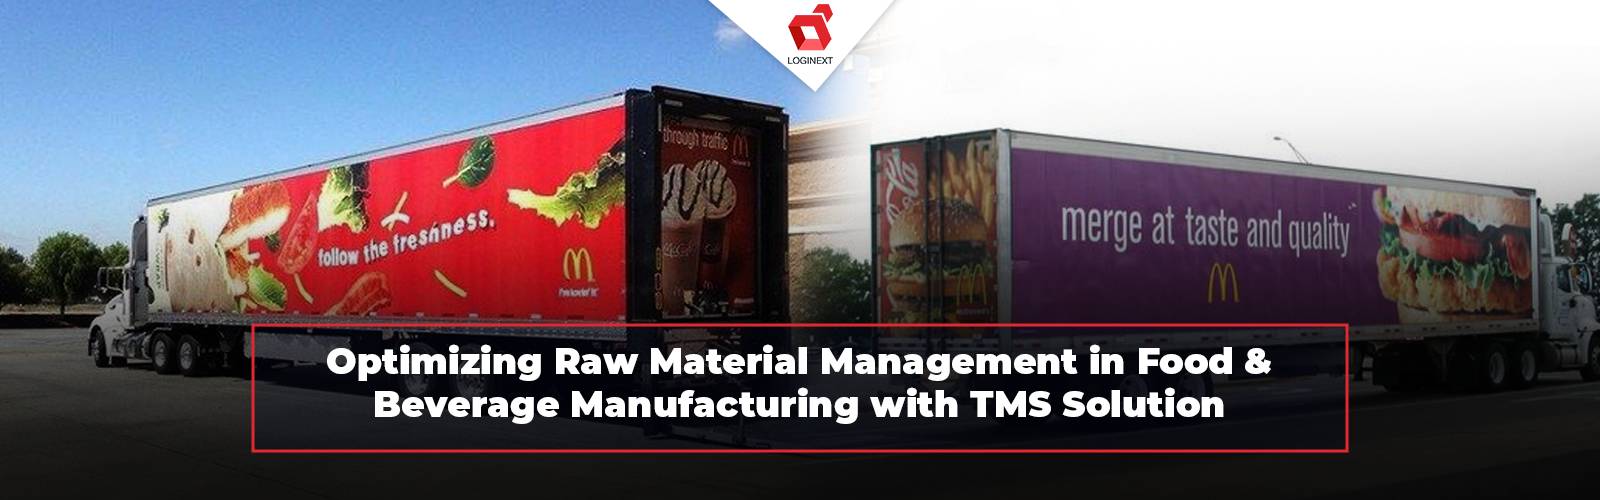 Optimizing Raw Material Management With TMS Solution